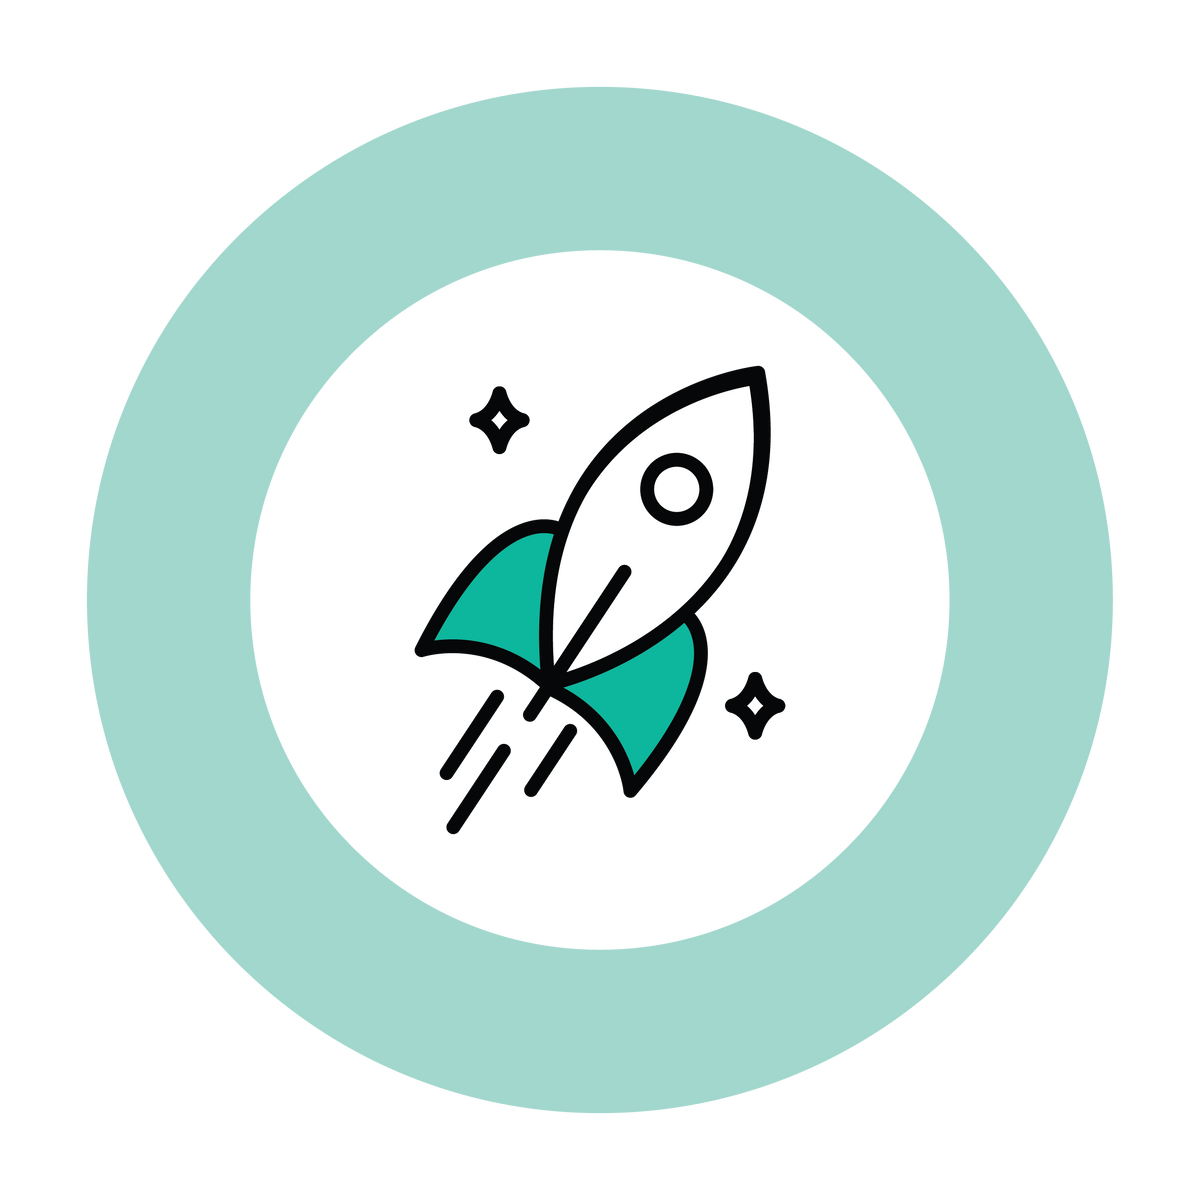 illustrated rocket ship taking off inside a teal circle with stars